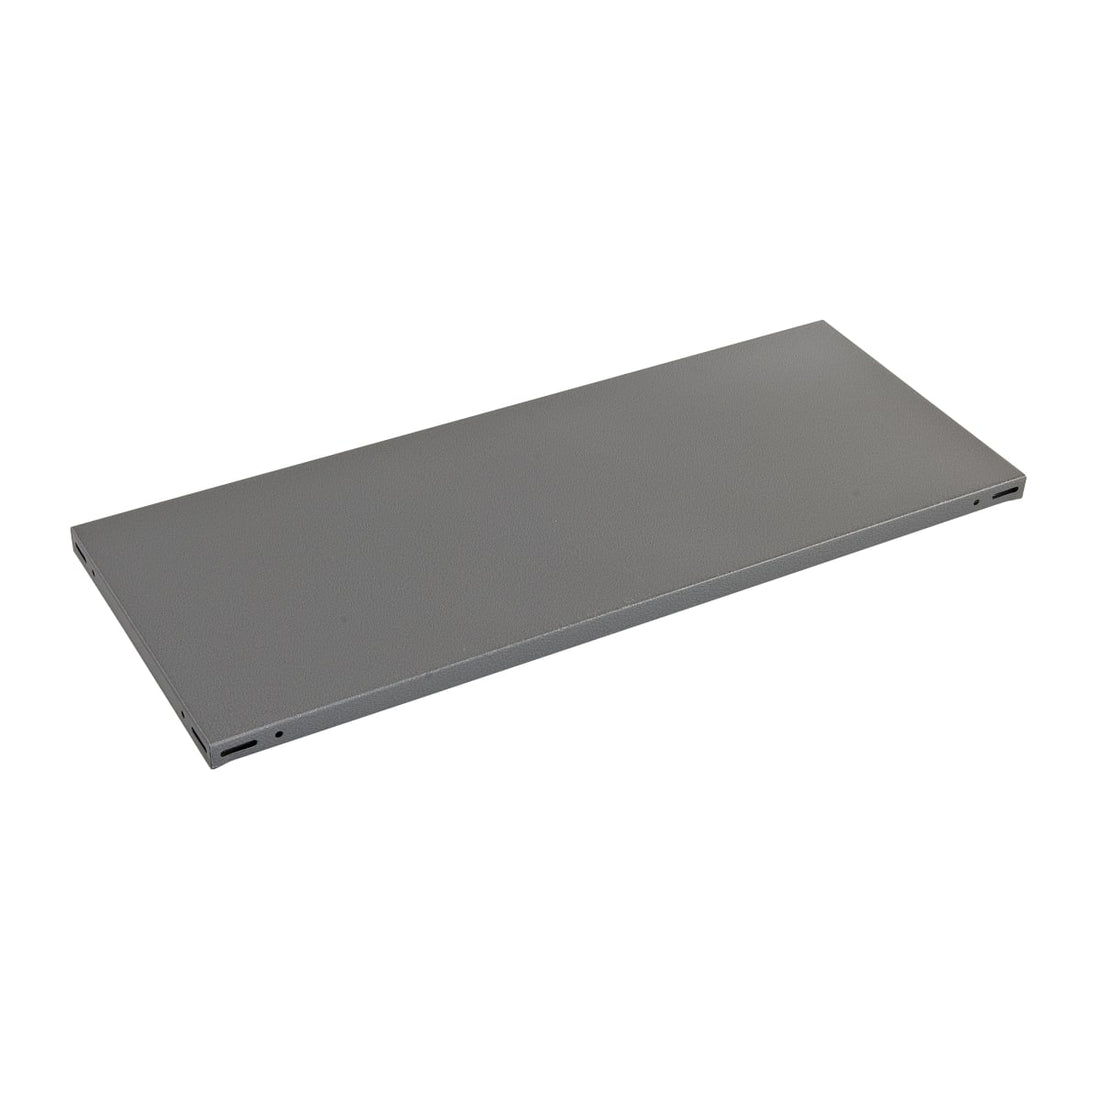 W120xD50 CM LOADING 200KG METAL BRICKETED GREY COLOUR SHEET